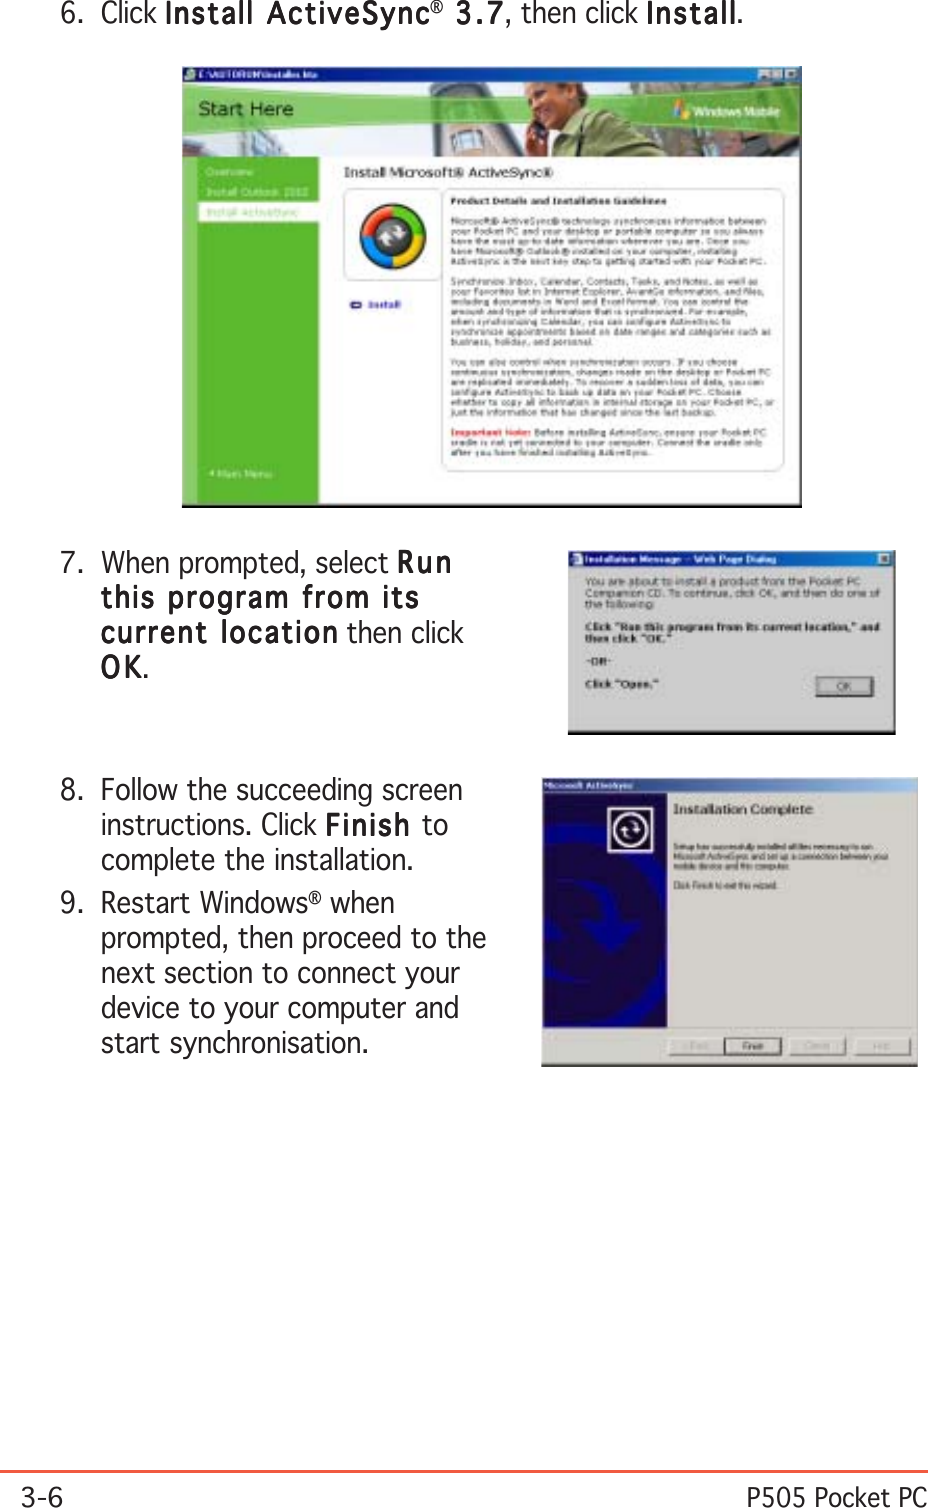 3-6P505 Pocket PC7. When prompted, select RunRunRunRunRunthis program from itsthis program from itsthis program from itsthis program from itsthis program from itscurrent locationcurrent locationcurrent locationcurrent locationcurrent location then clickOKOKOKOKOK.8. Follow the succeeding screeninstructions. Click FinishFinishFinishFinishFinish tocomplete the installation.9. Restart Windows® whenprompted, then proceed to thenext section to connect yourdevice to your computer andstart synchronisation.6. Click Install ActiveSyncInstall ActiveSyncInstall ActiveSyncInstall ActiveSyncInstall ActiveSync® 3.7 3.7 3.7 3.7  3 . 7, then click InstallInstallInstallInstallInstall.